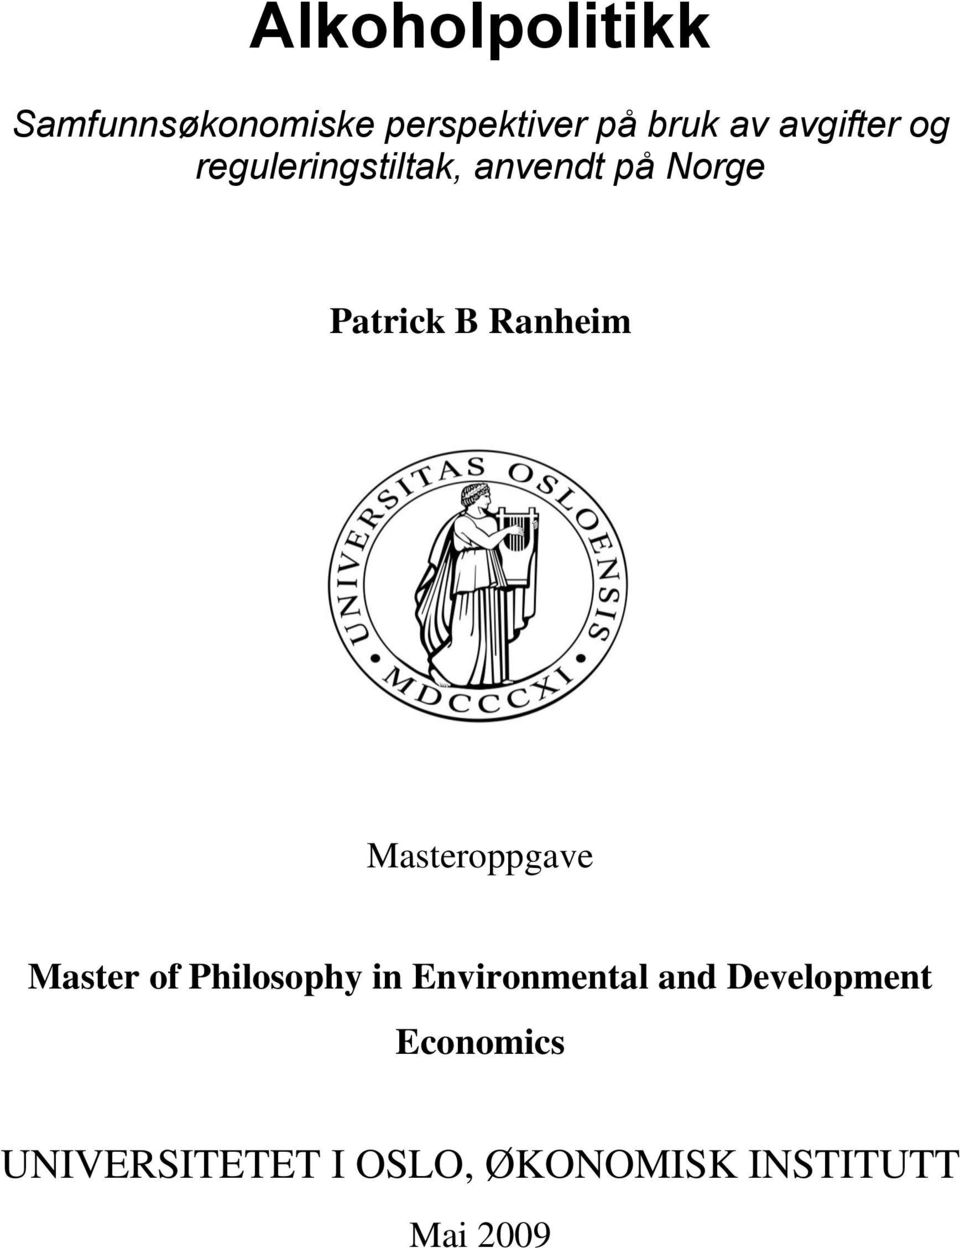 Maseroppgave Maser of Philosophy in Environmenal and